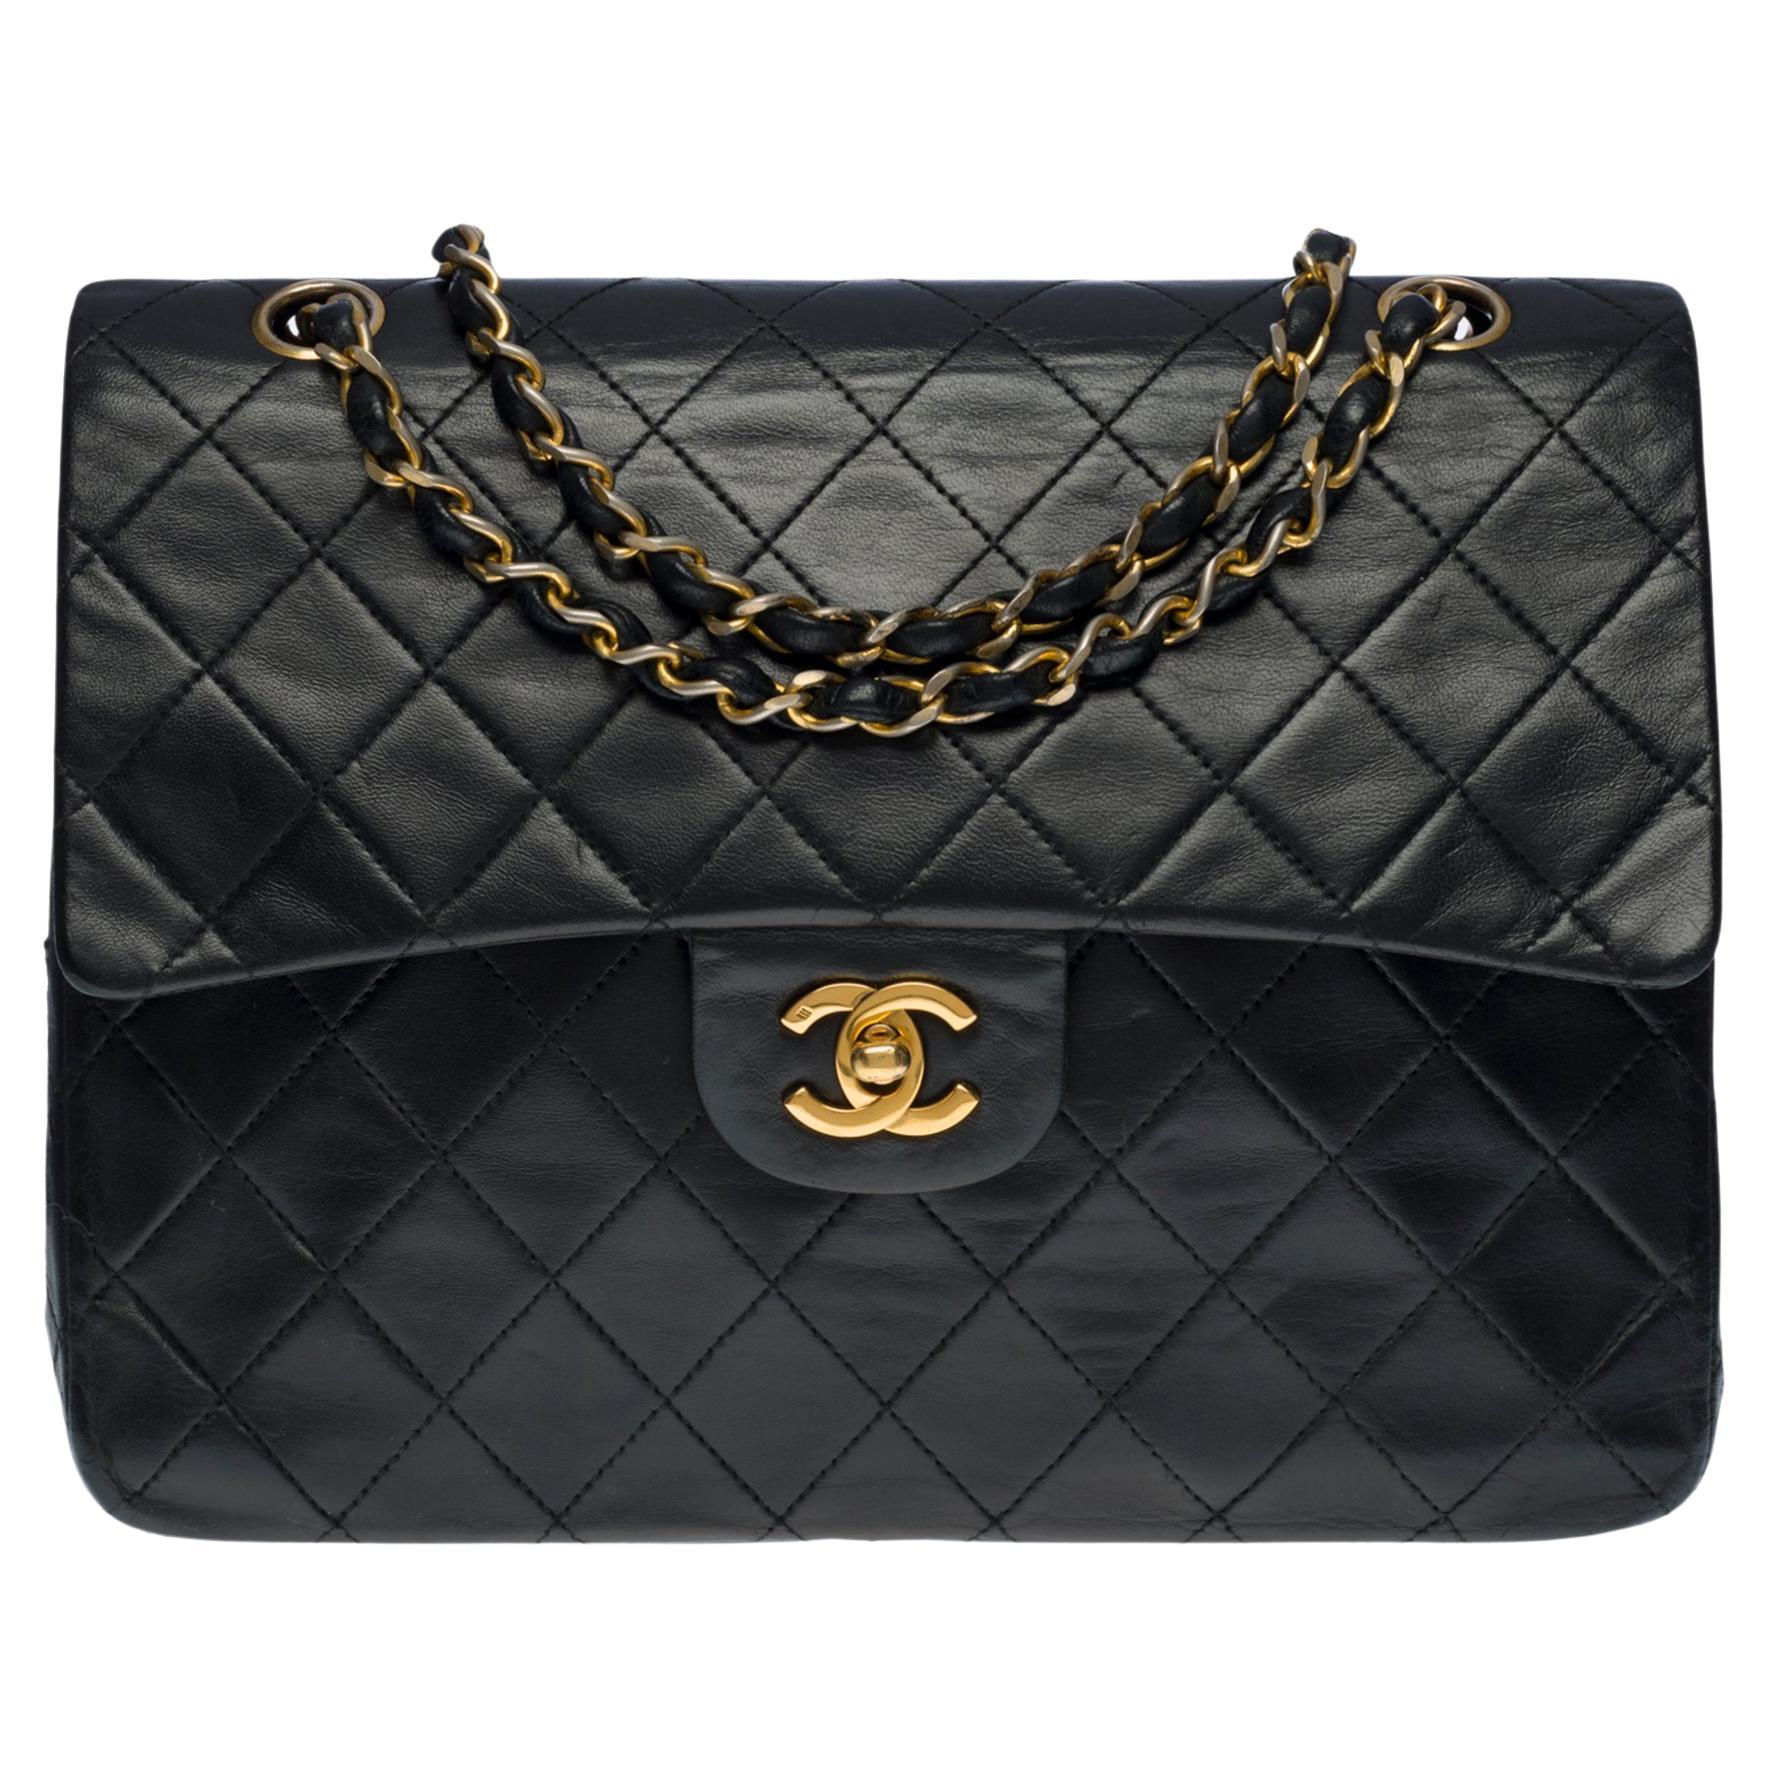 Chanel Timeless medium 25 cm bag with double flap in black quilted leather, GHW For Sale